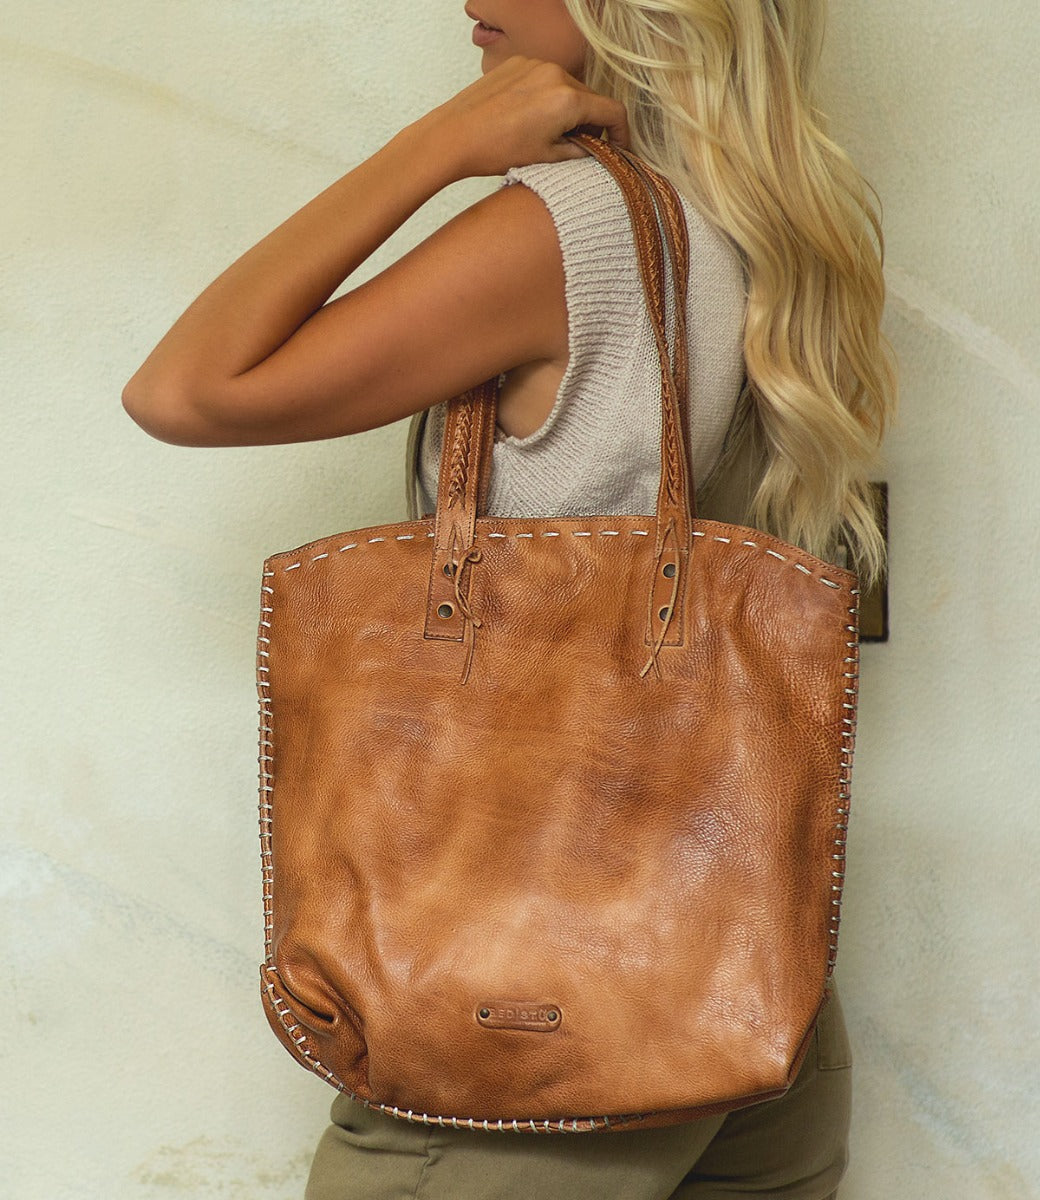 A blonde woman holding a Barra leather tote bag by Bed Stu.